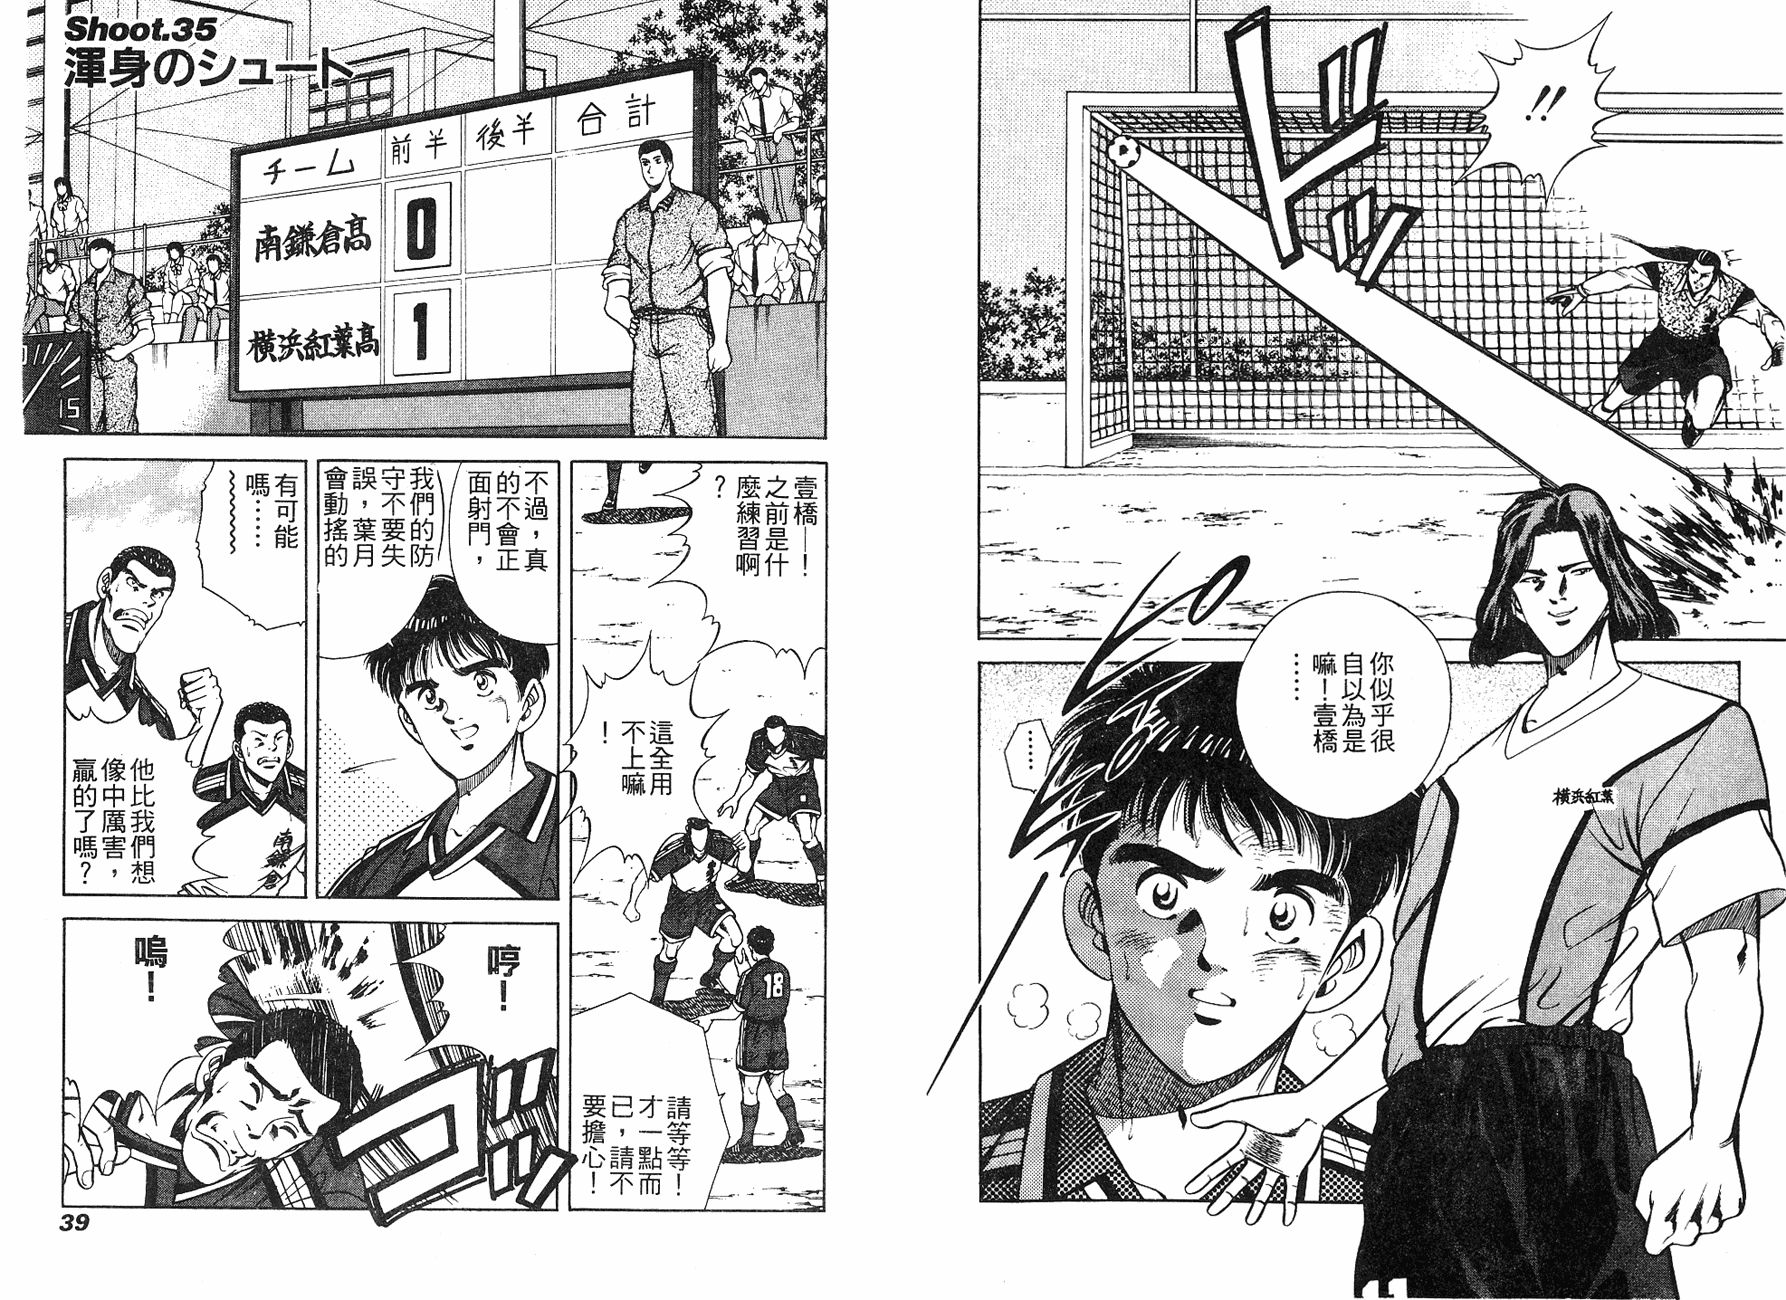 Two Top - 第04卷(1/2) - 5